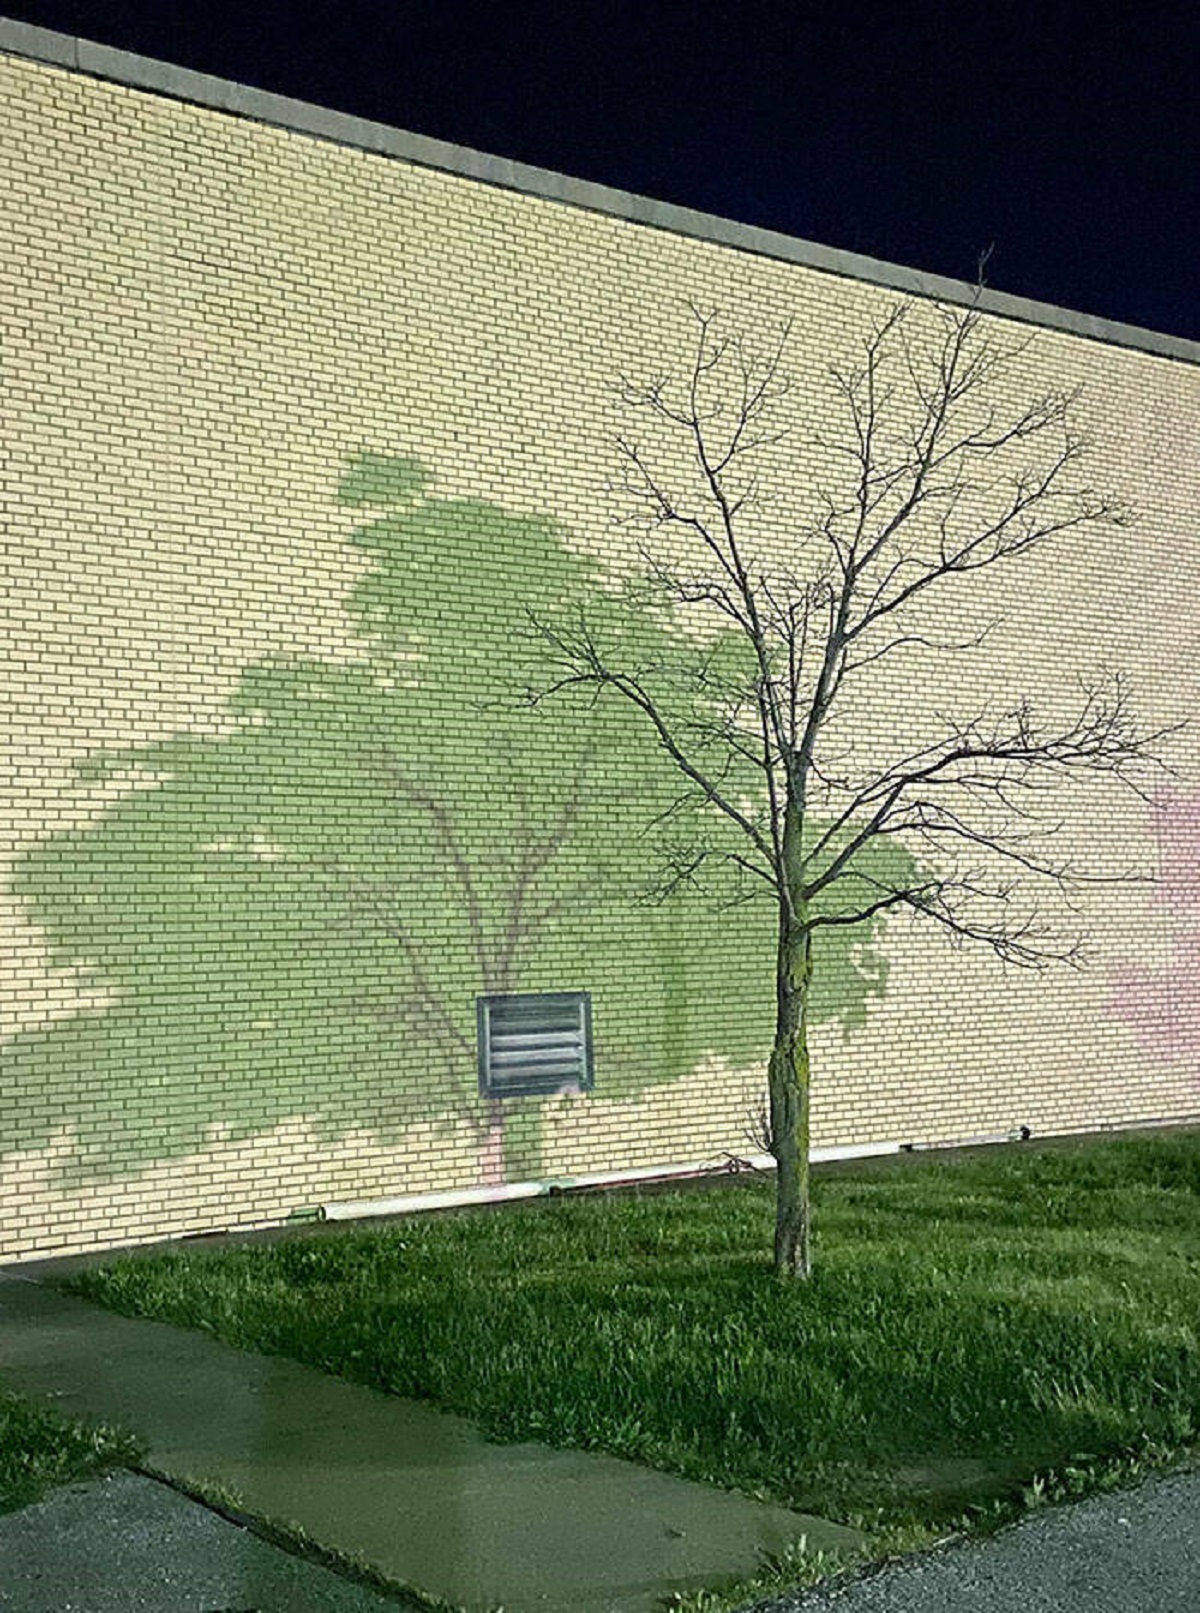 "This Shadow From Two Different Trees In My Parking Lot"